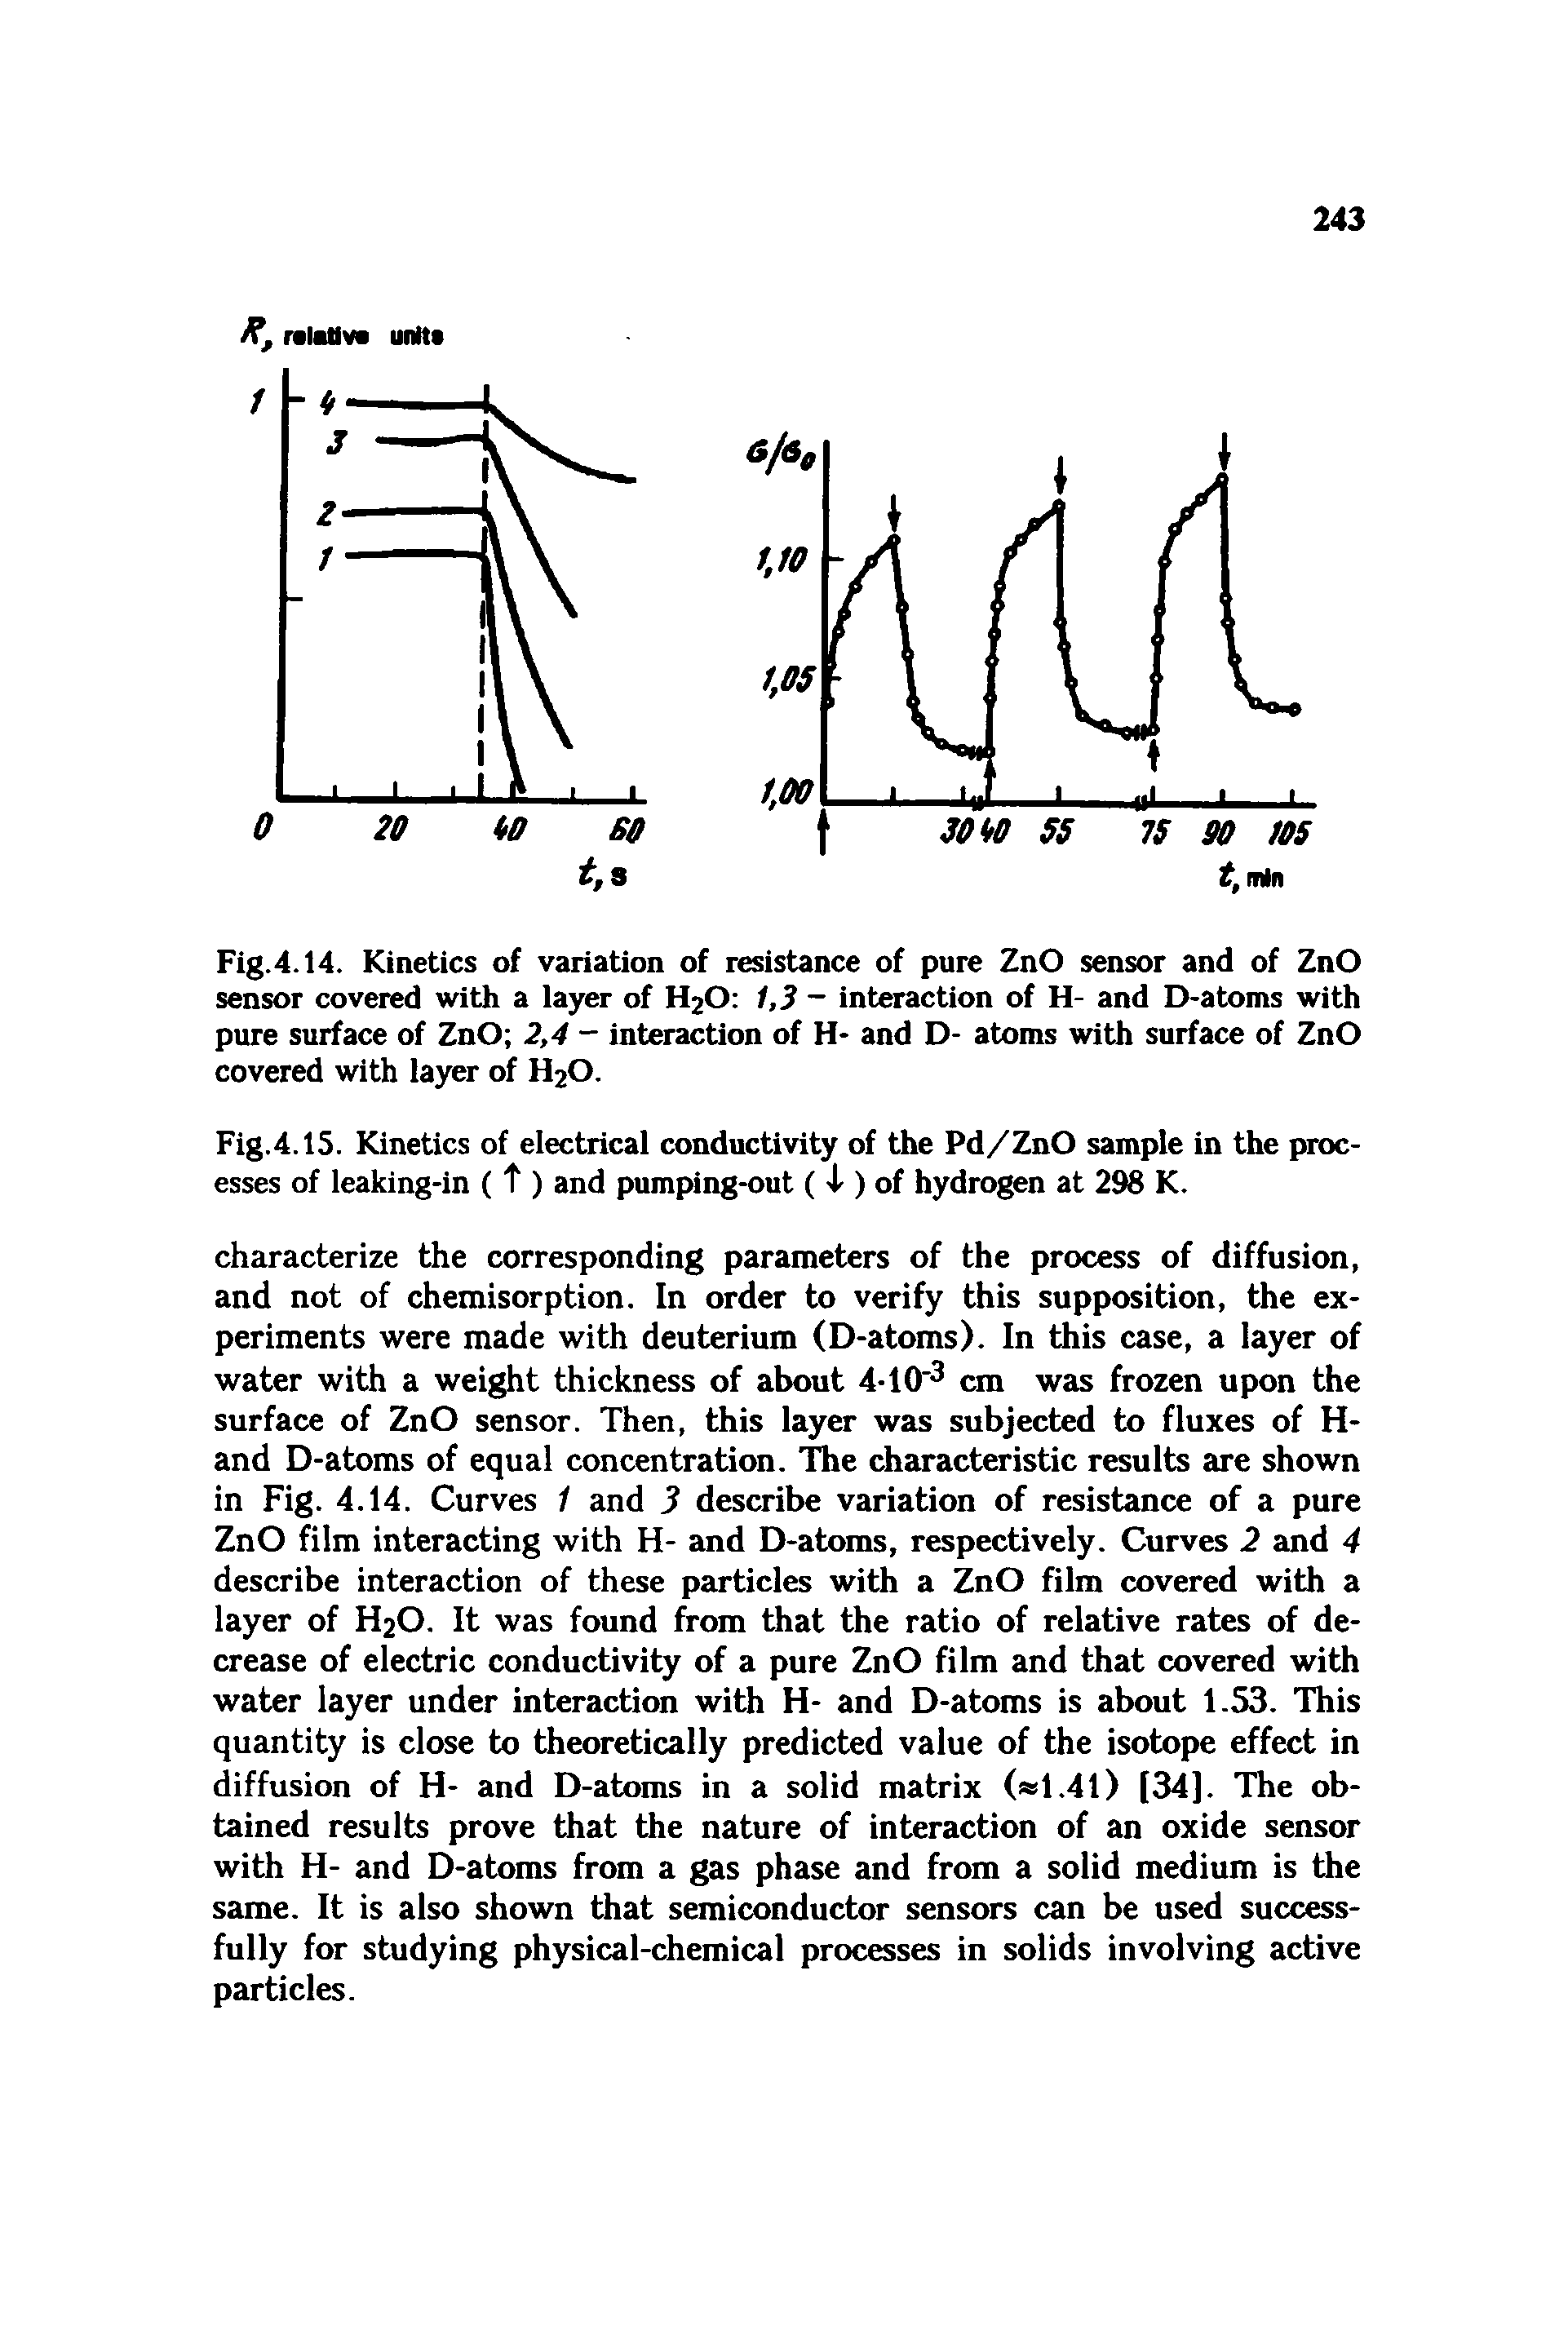 Fig.4.14. Kinetics of variation of resistance of pure ZnO sensor and of ZnO sensor covered with a layer of H2O i,3 — interaction of H- and D-atoms with pure surface of ZnO 2,4 - interaction of H- and D- atoms with surface of ZnO covered with layer of H2O.